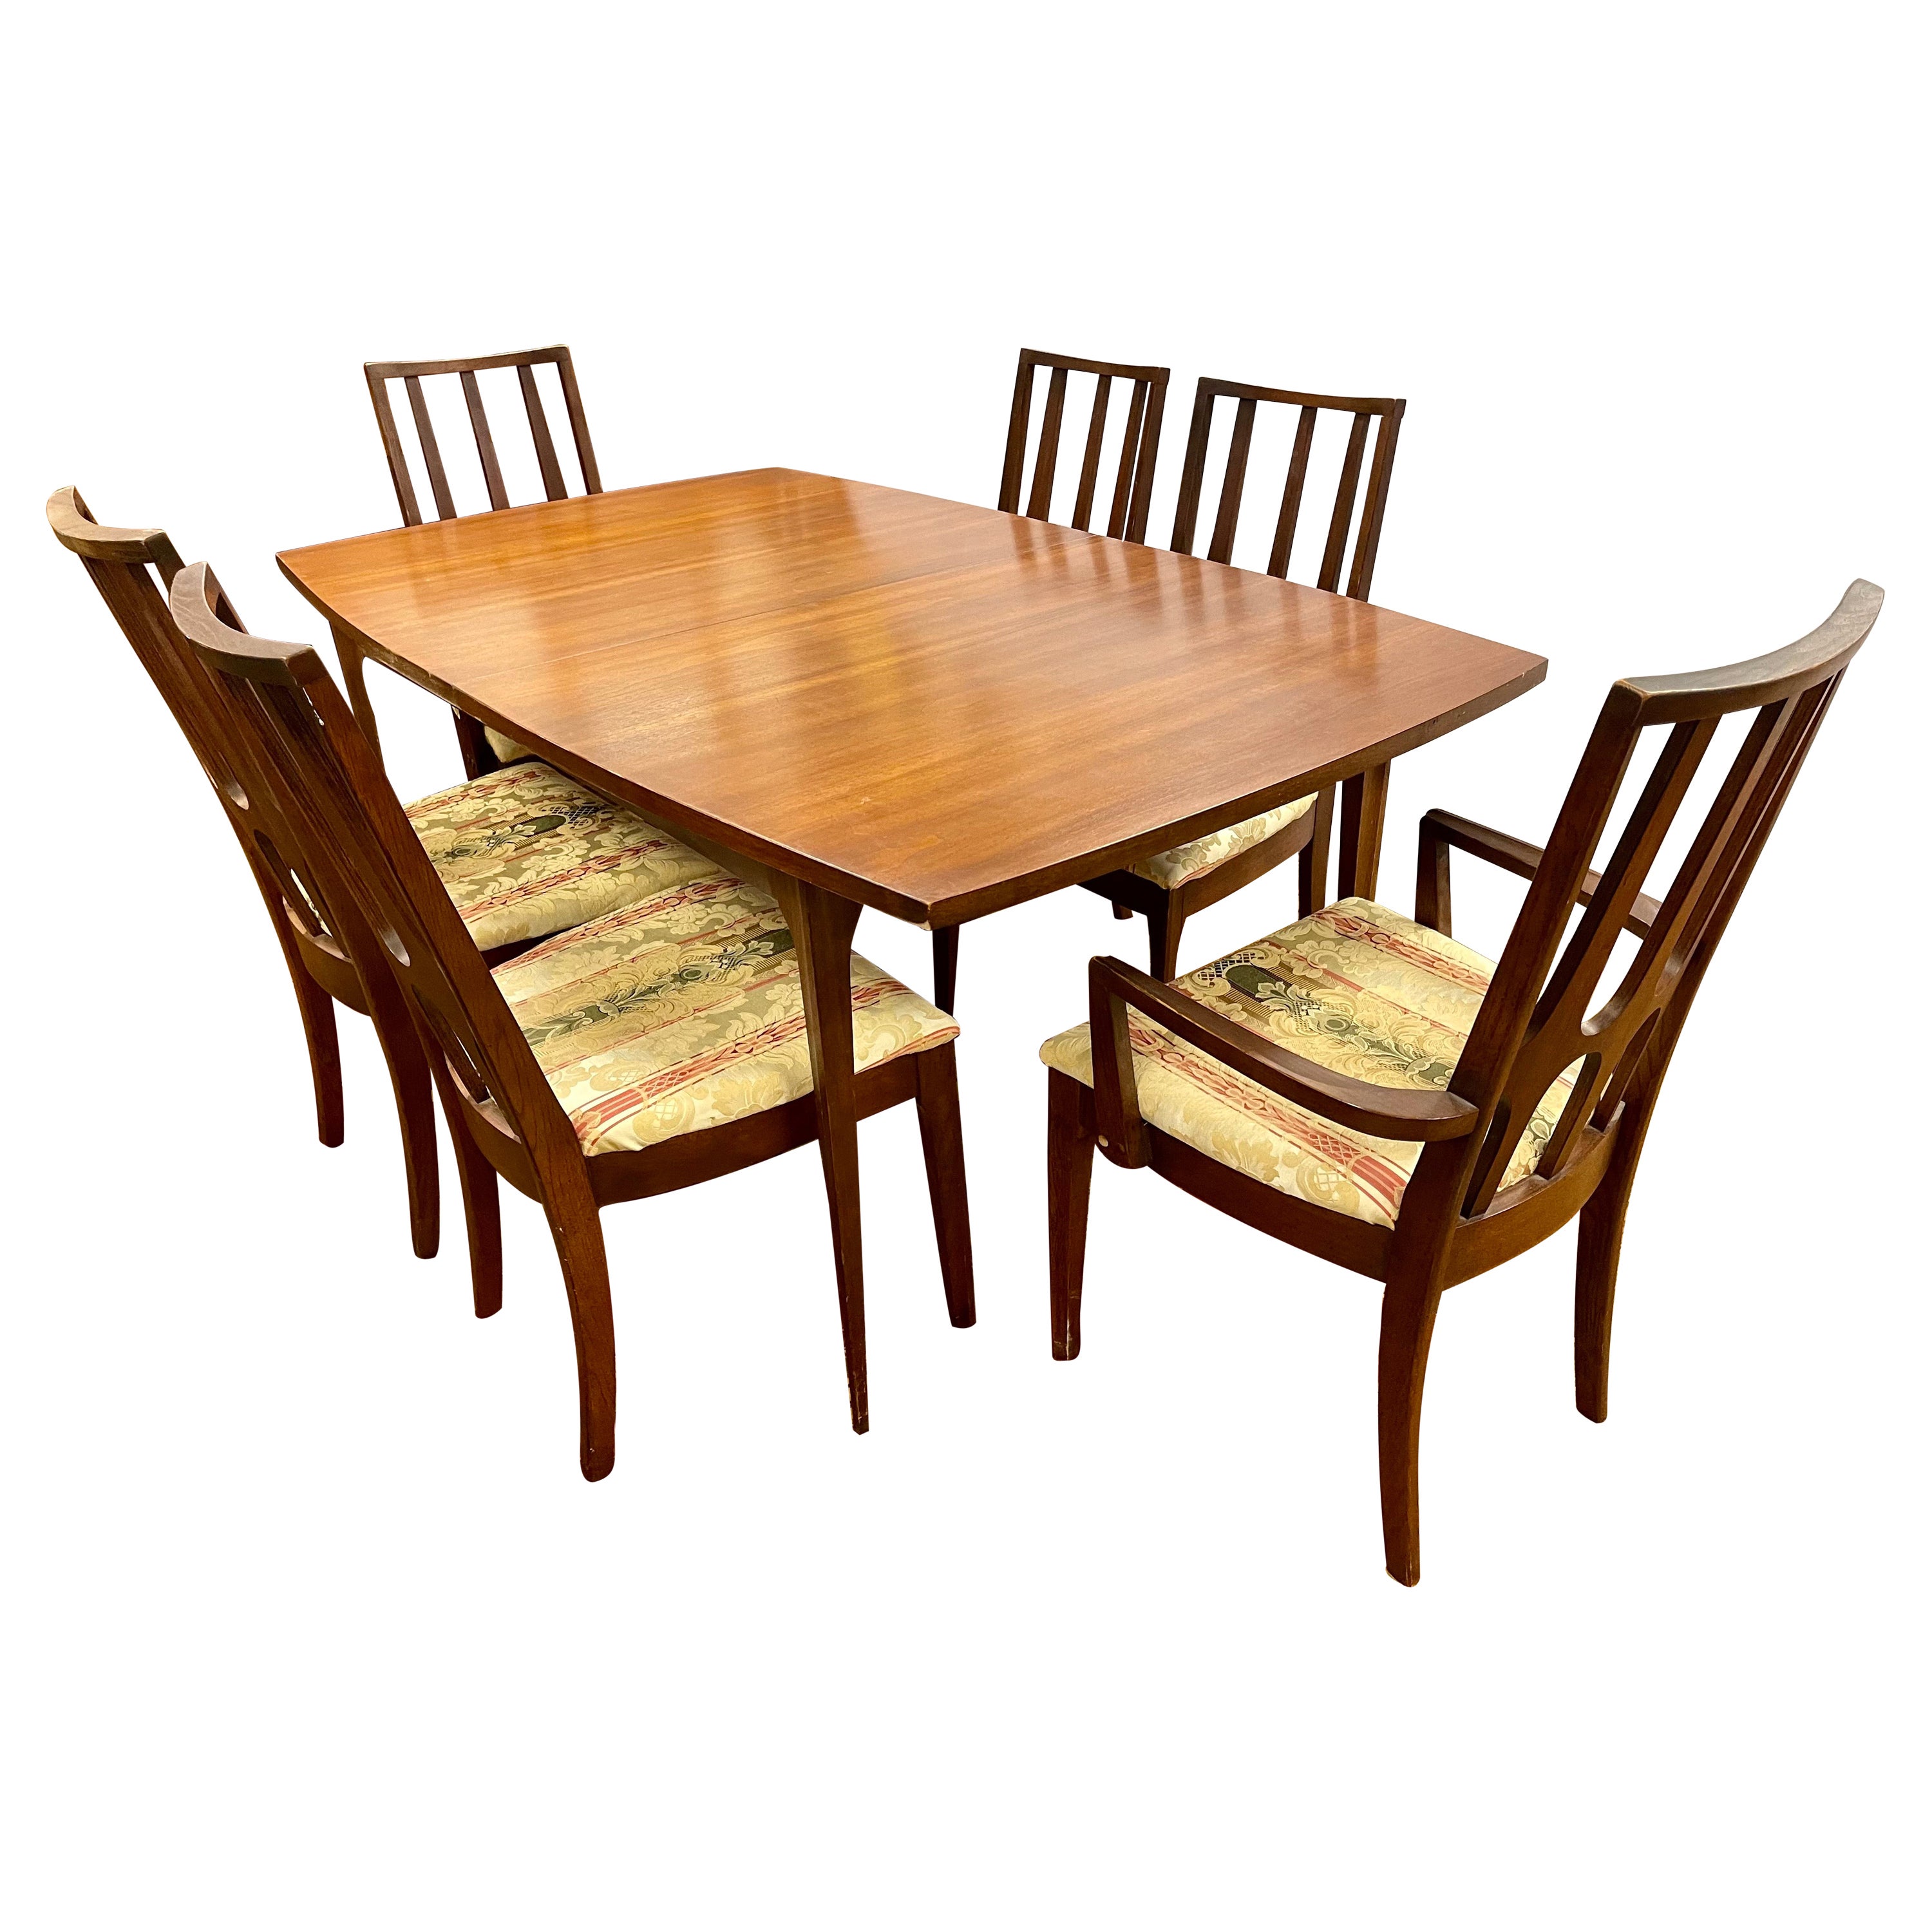 Mid-Century Modern Broyhill Brasilia Expandable Dining Room Set & Table 6 Chairs